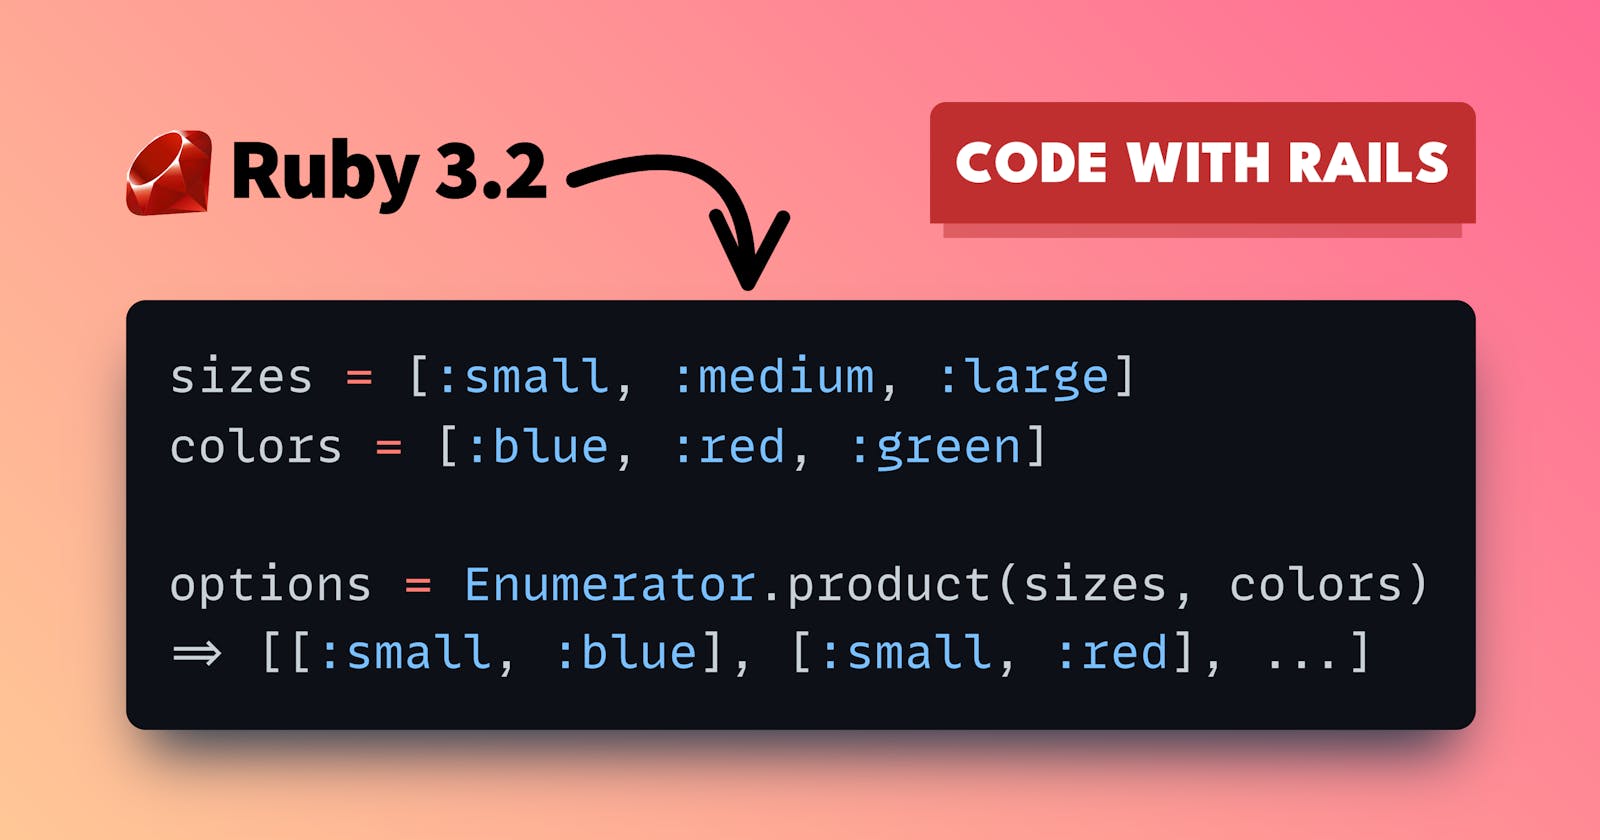 Ruby 3.2 introduces Enumerator::product